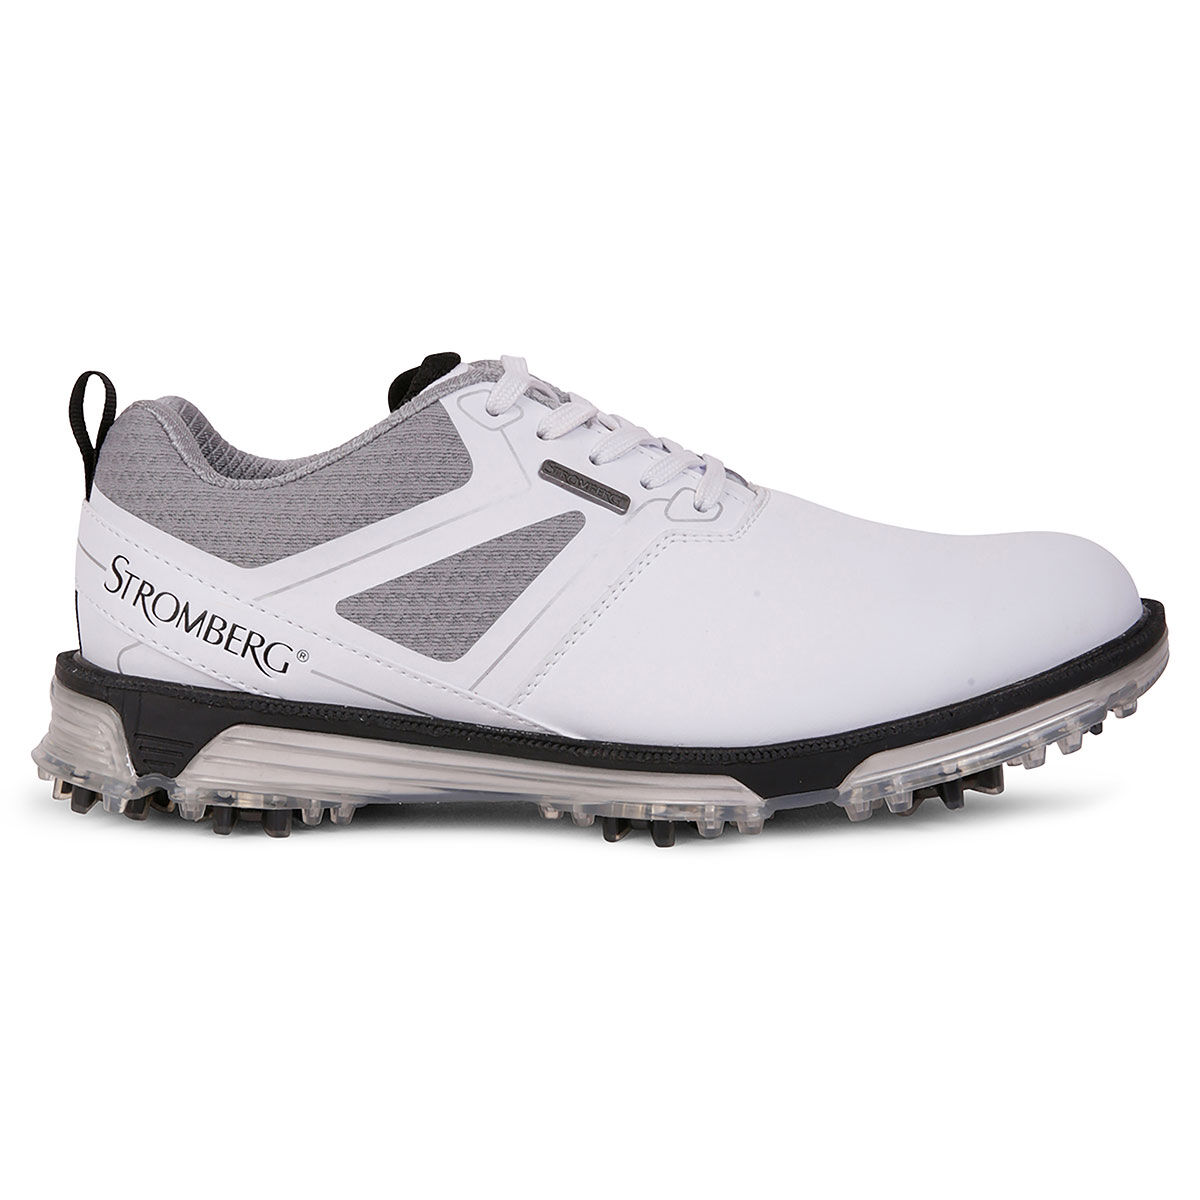 Stromberg Men's Tour Classic Waterproof Spiked Golf Shoes, Mens, White, 8 | American Golf - Father's Day Gift von Stromberg